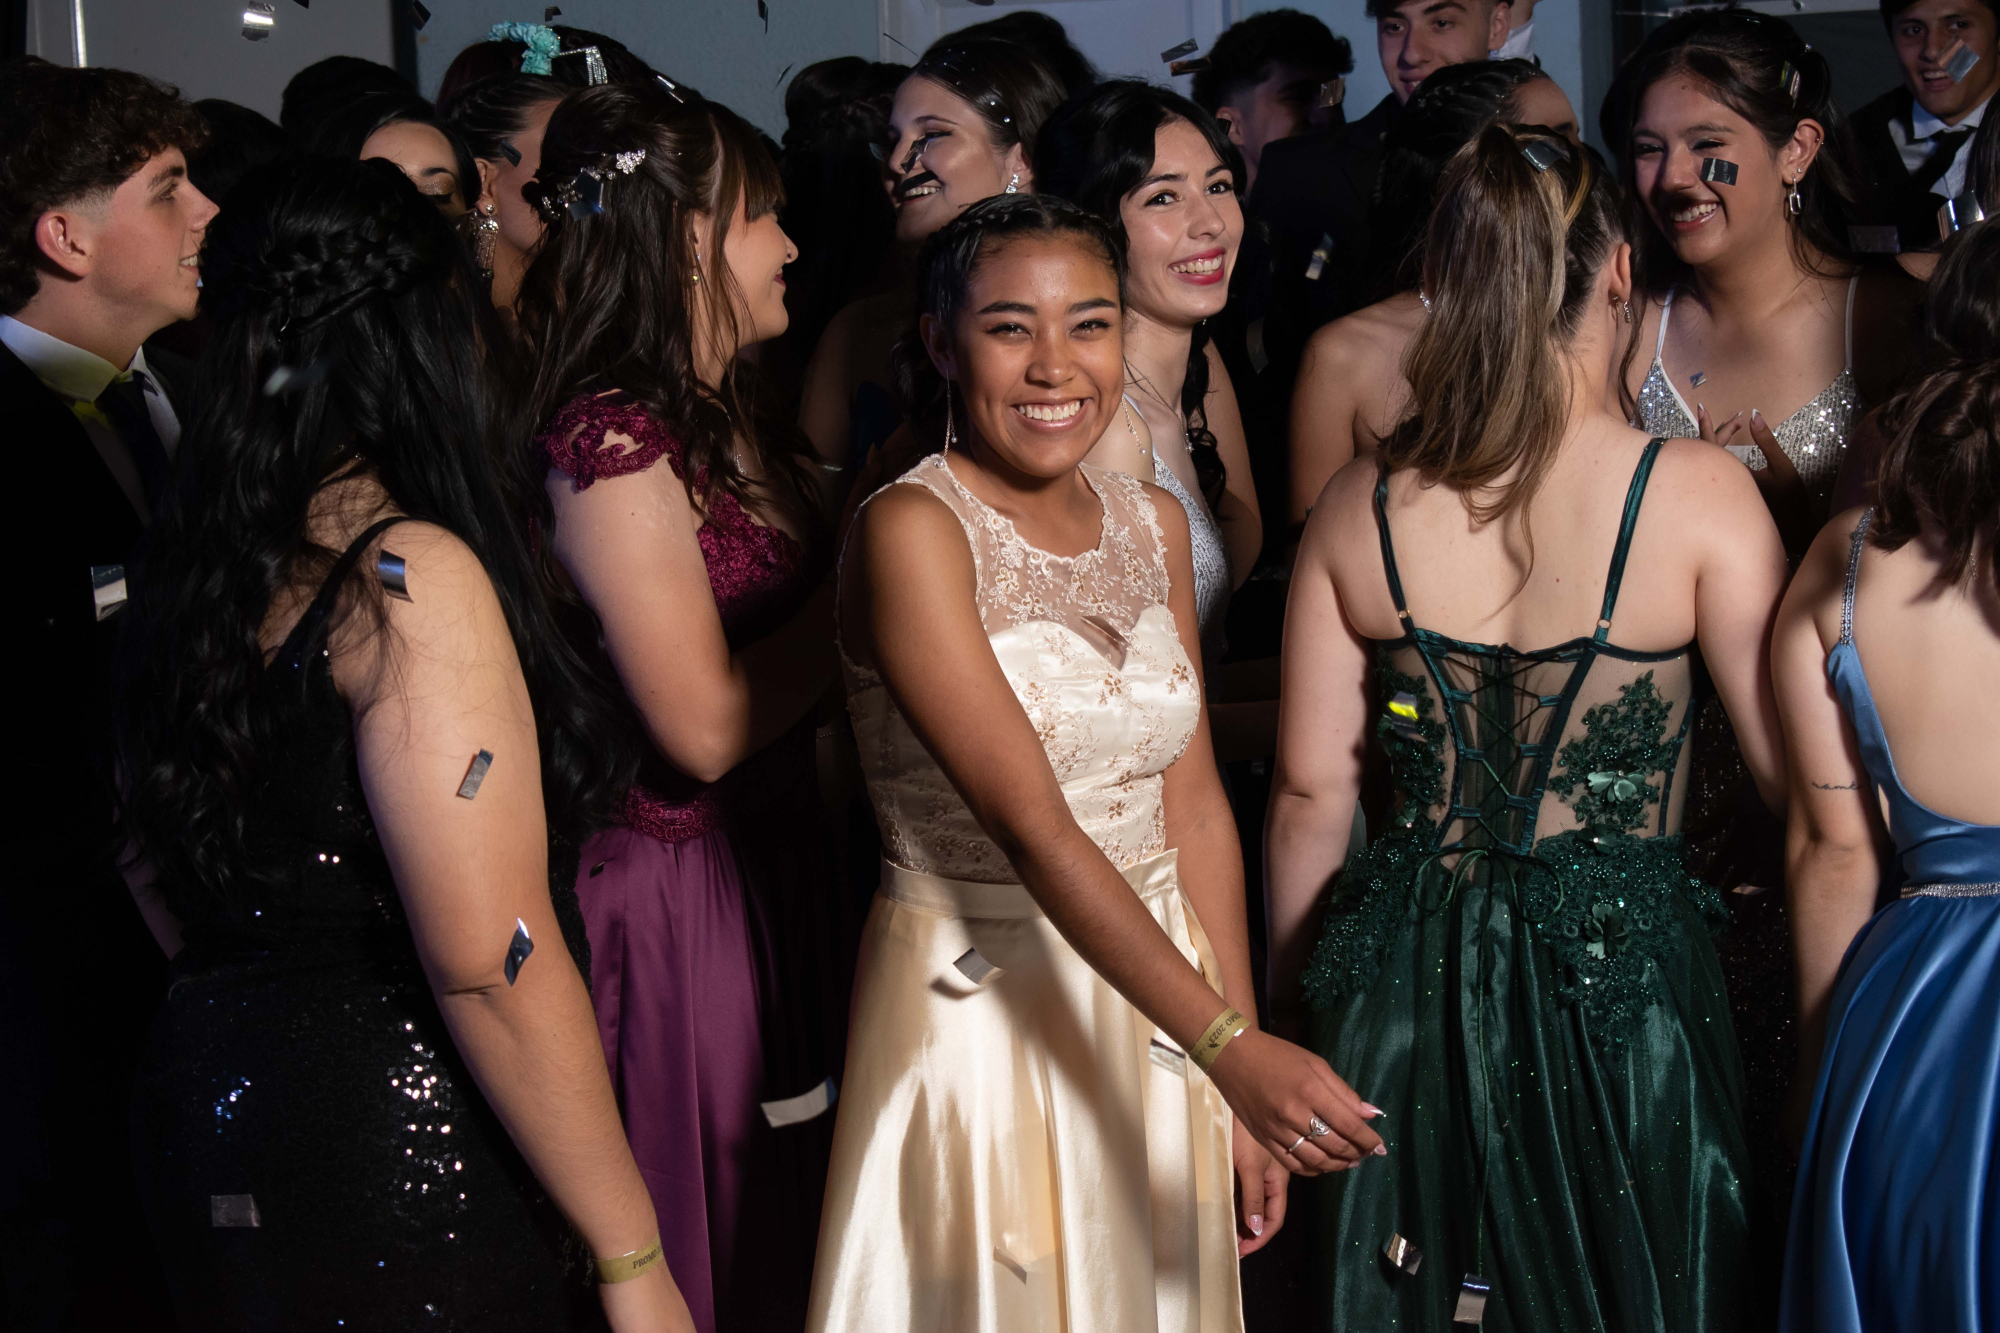 Donated prom dresses help students in need